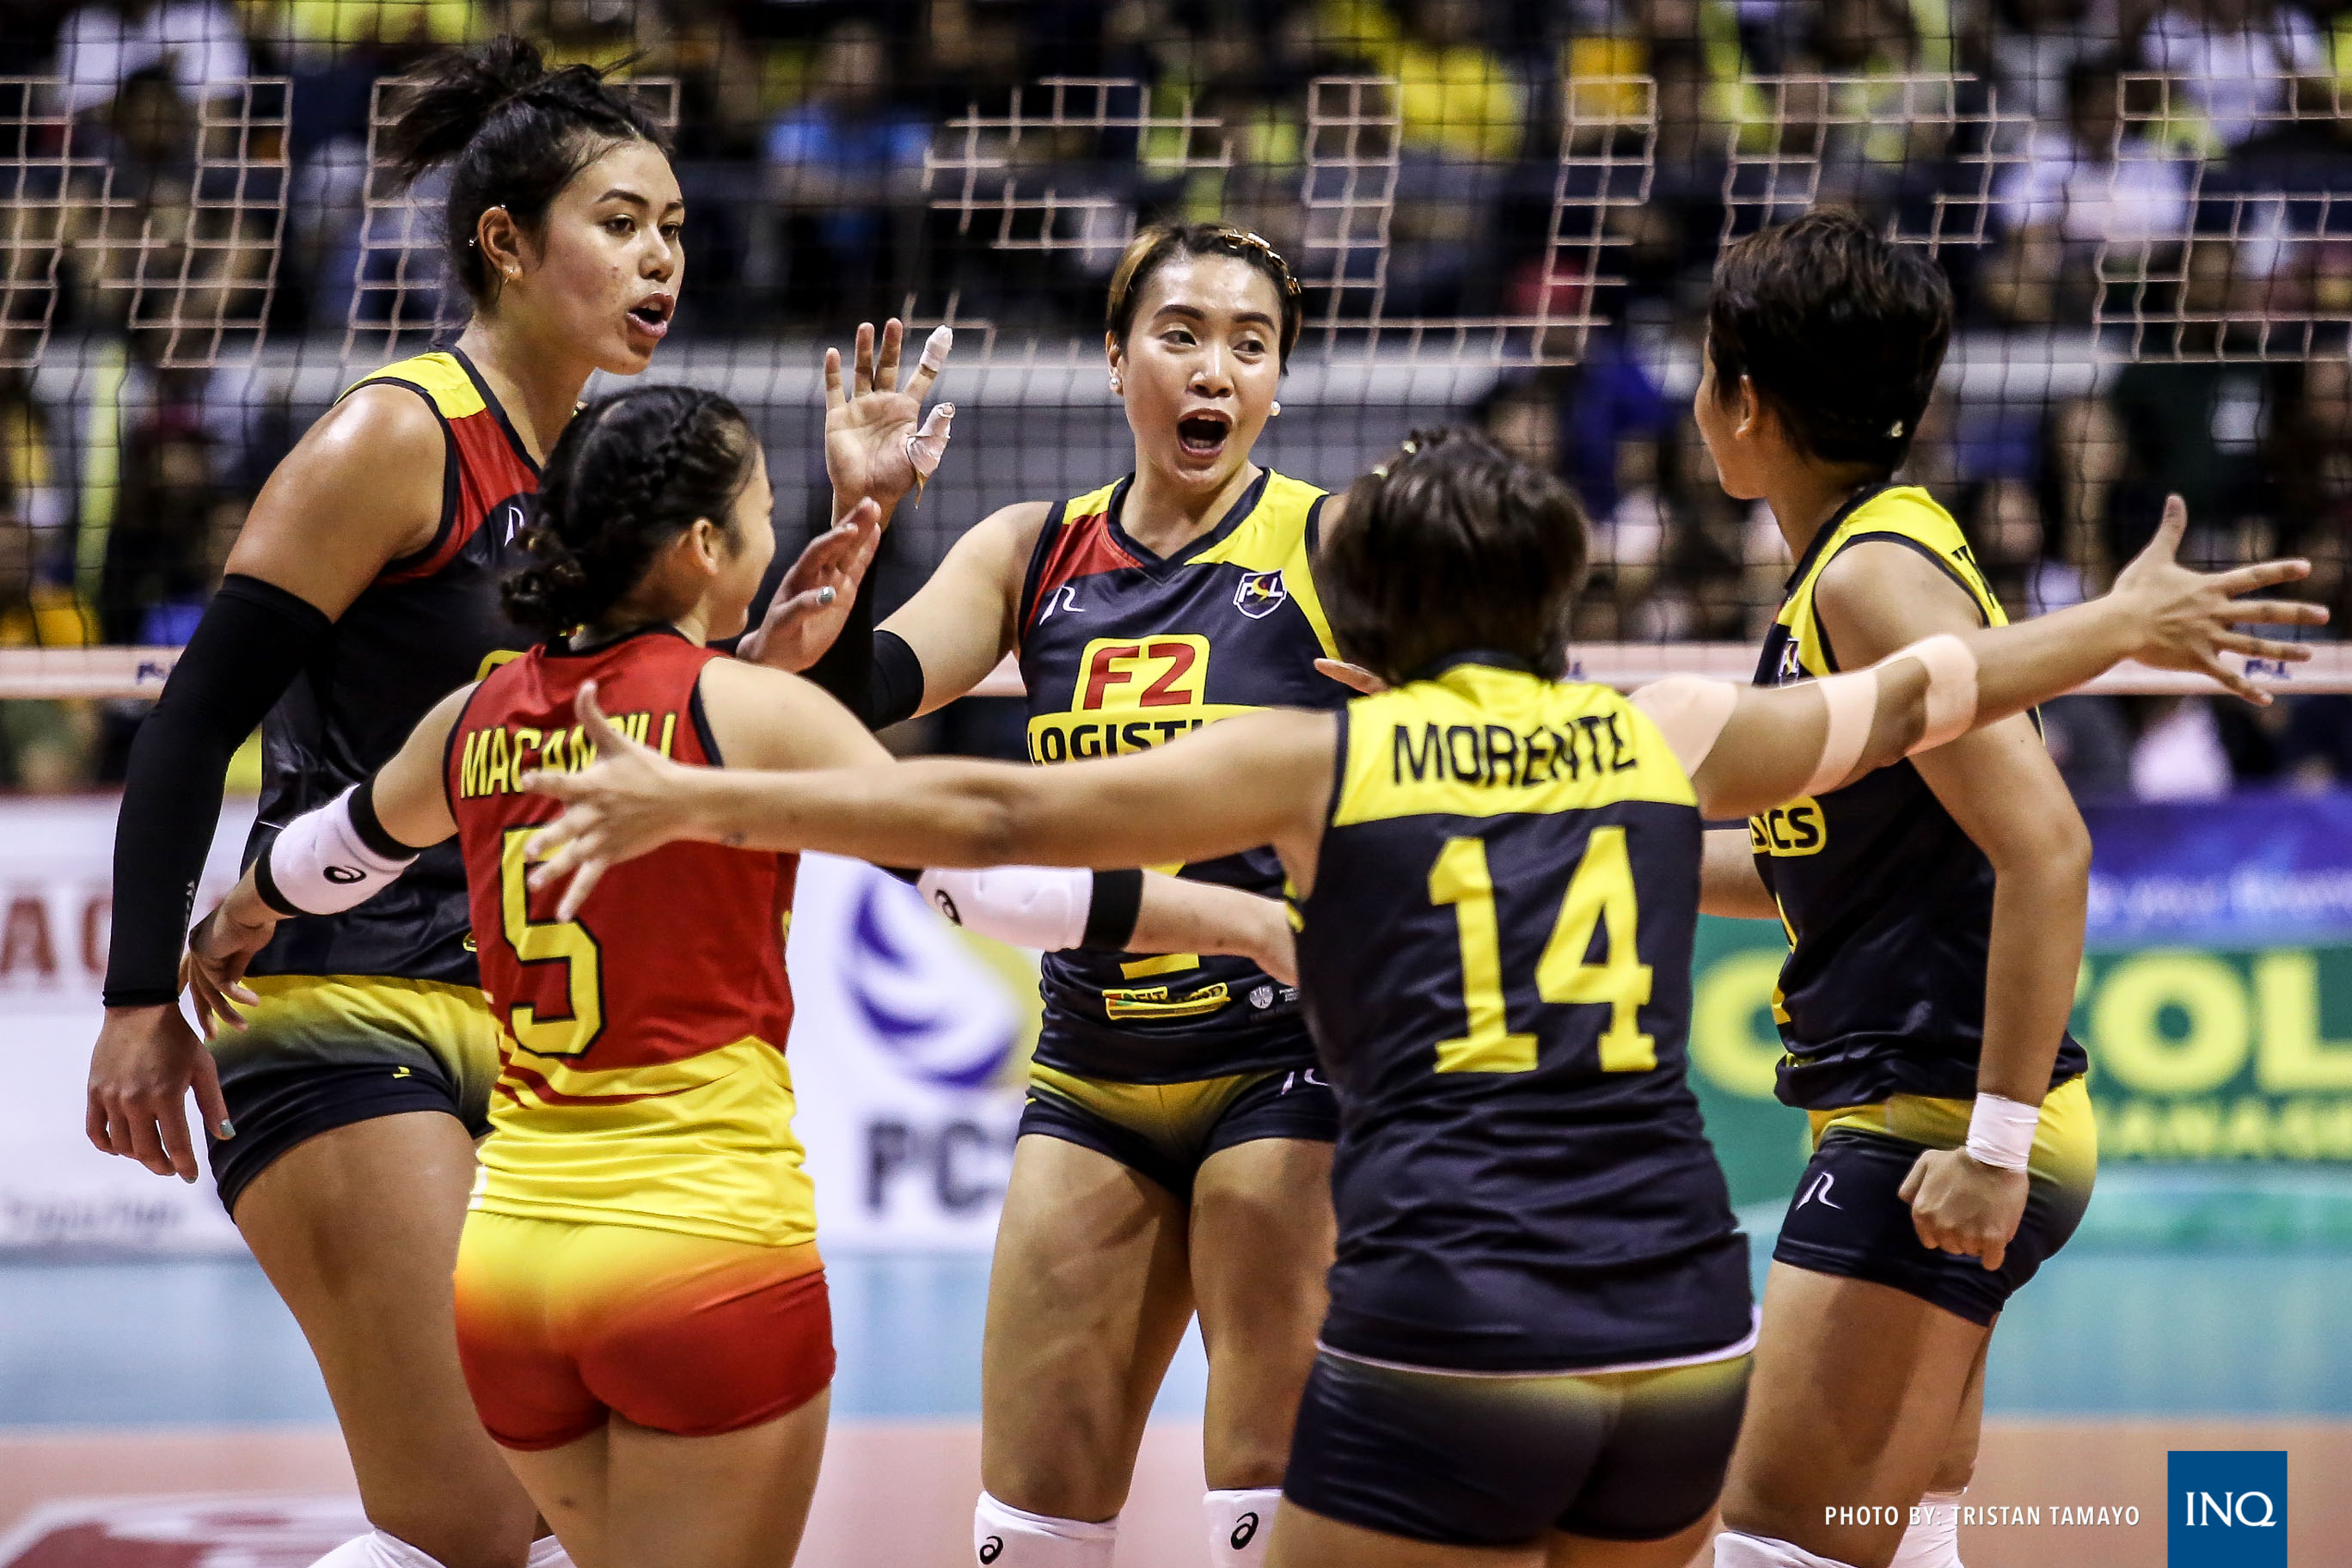 Aby Maraño and the F2 Logistics.